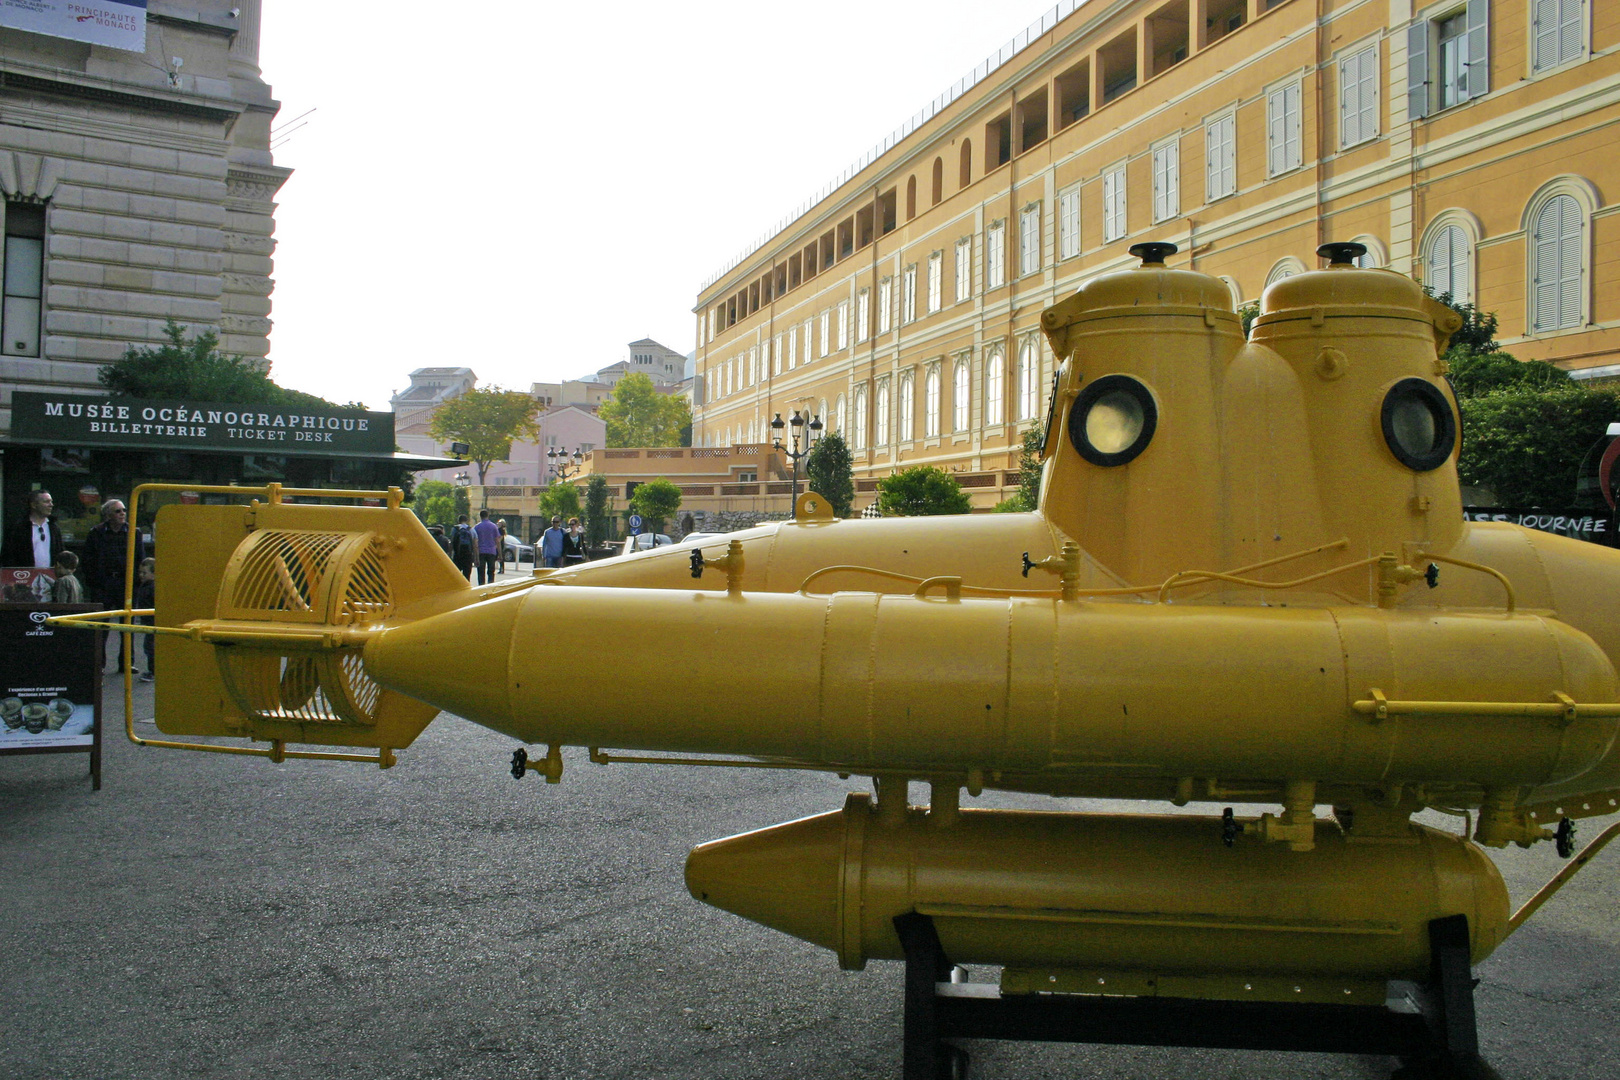 we all live in a yellow submarine